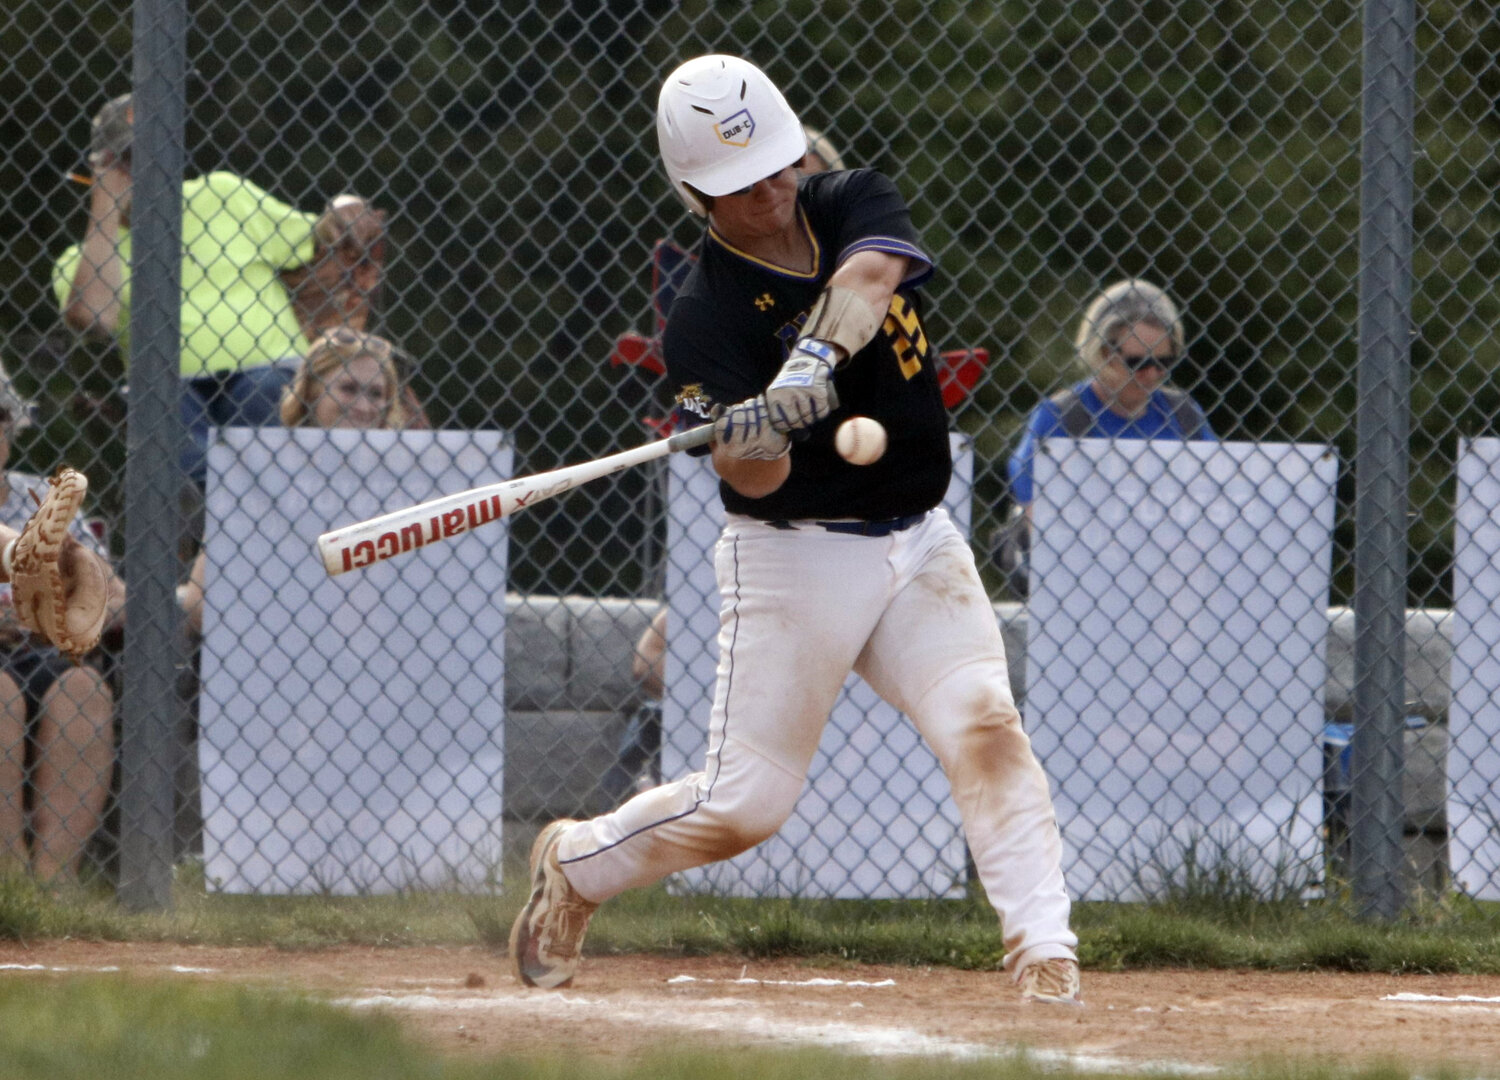 Bryce Williams offers at a pitch during Wright City's win over Wellsville Middletown last week.